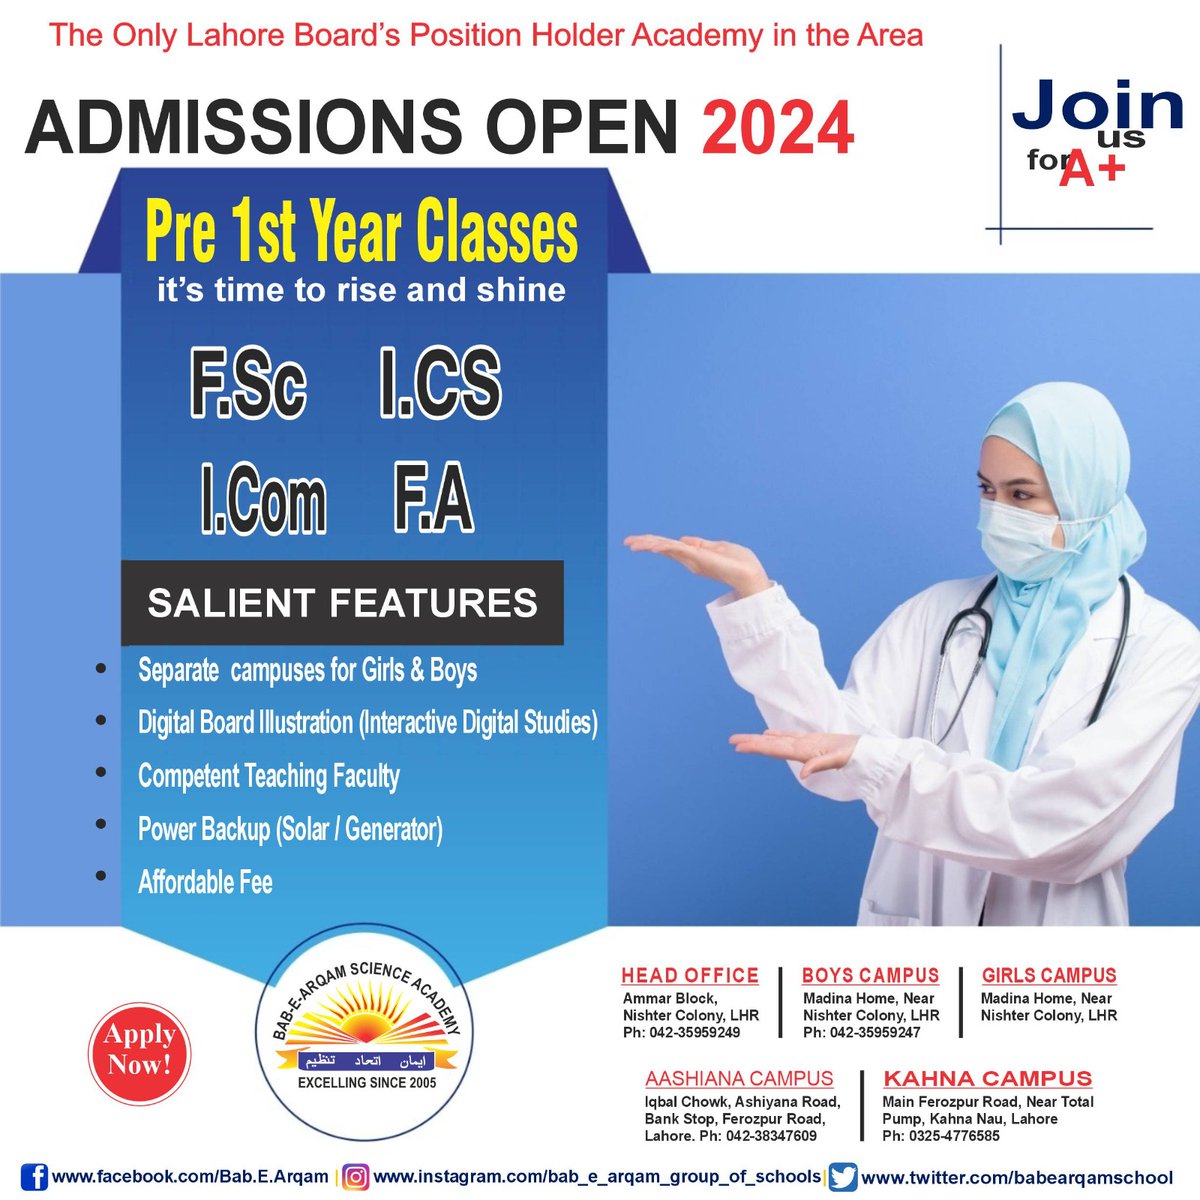 #EducationForAll #Admissions2024
#Admissionsopen
#PreparationMatters #AcademicJourney
#BAB_E_ARQAM
#babearqam
#bab_e_arqam_group_of_schools
#Babearqamgroupofschools
#babearqam_academy
#bab_e_arqam_science_academy
#babearqamscienceacademy
#bab_e_arqam_group_of_institutions